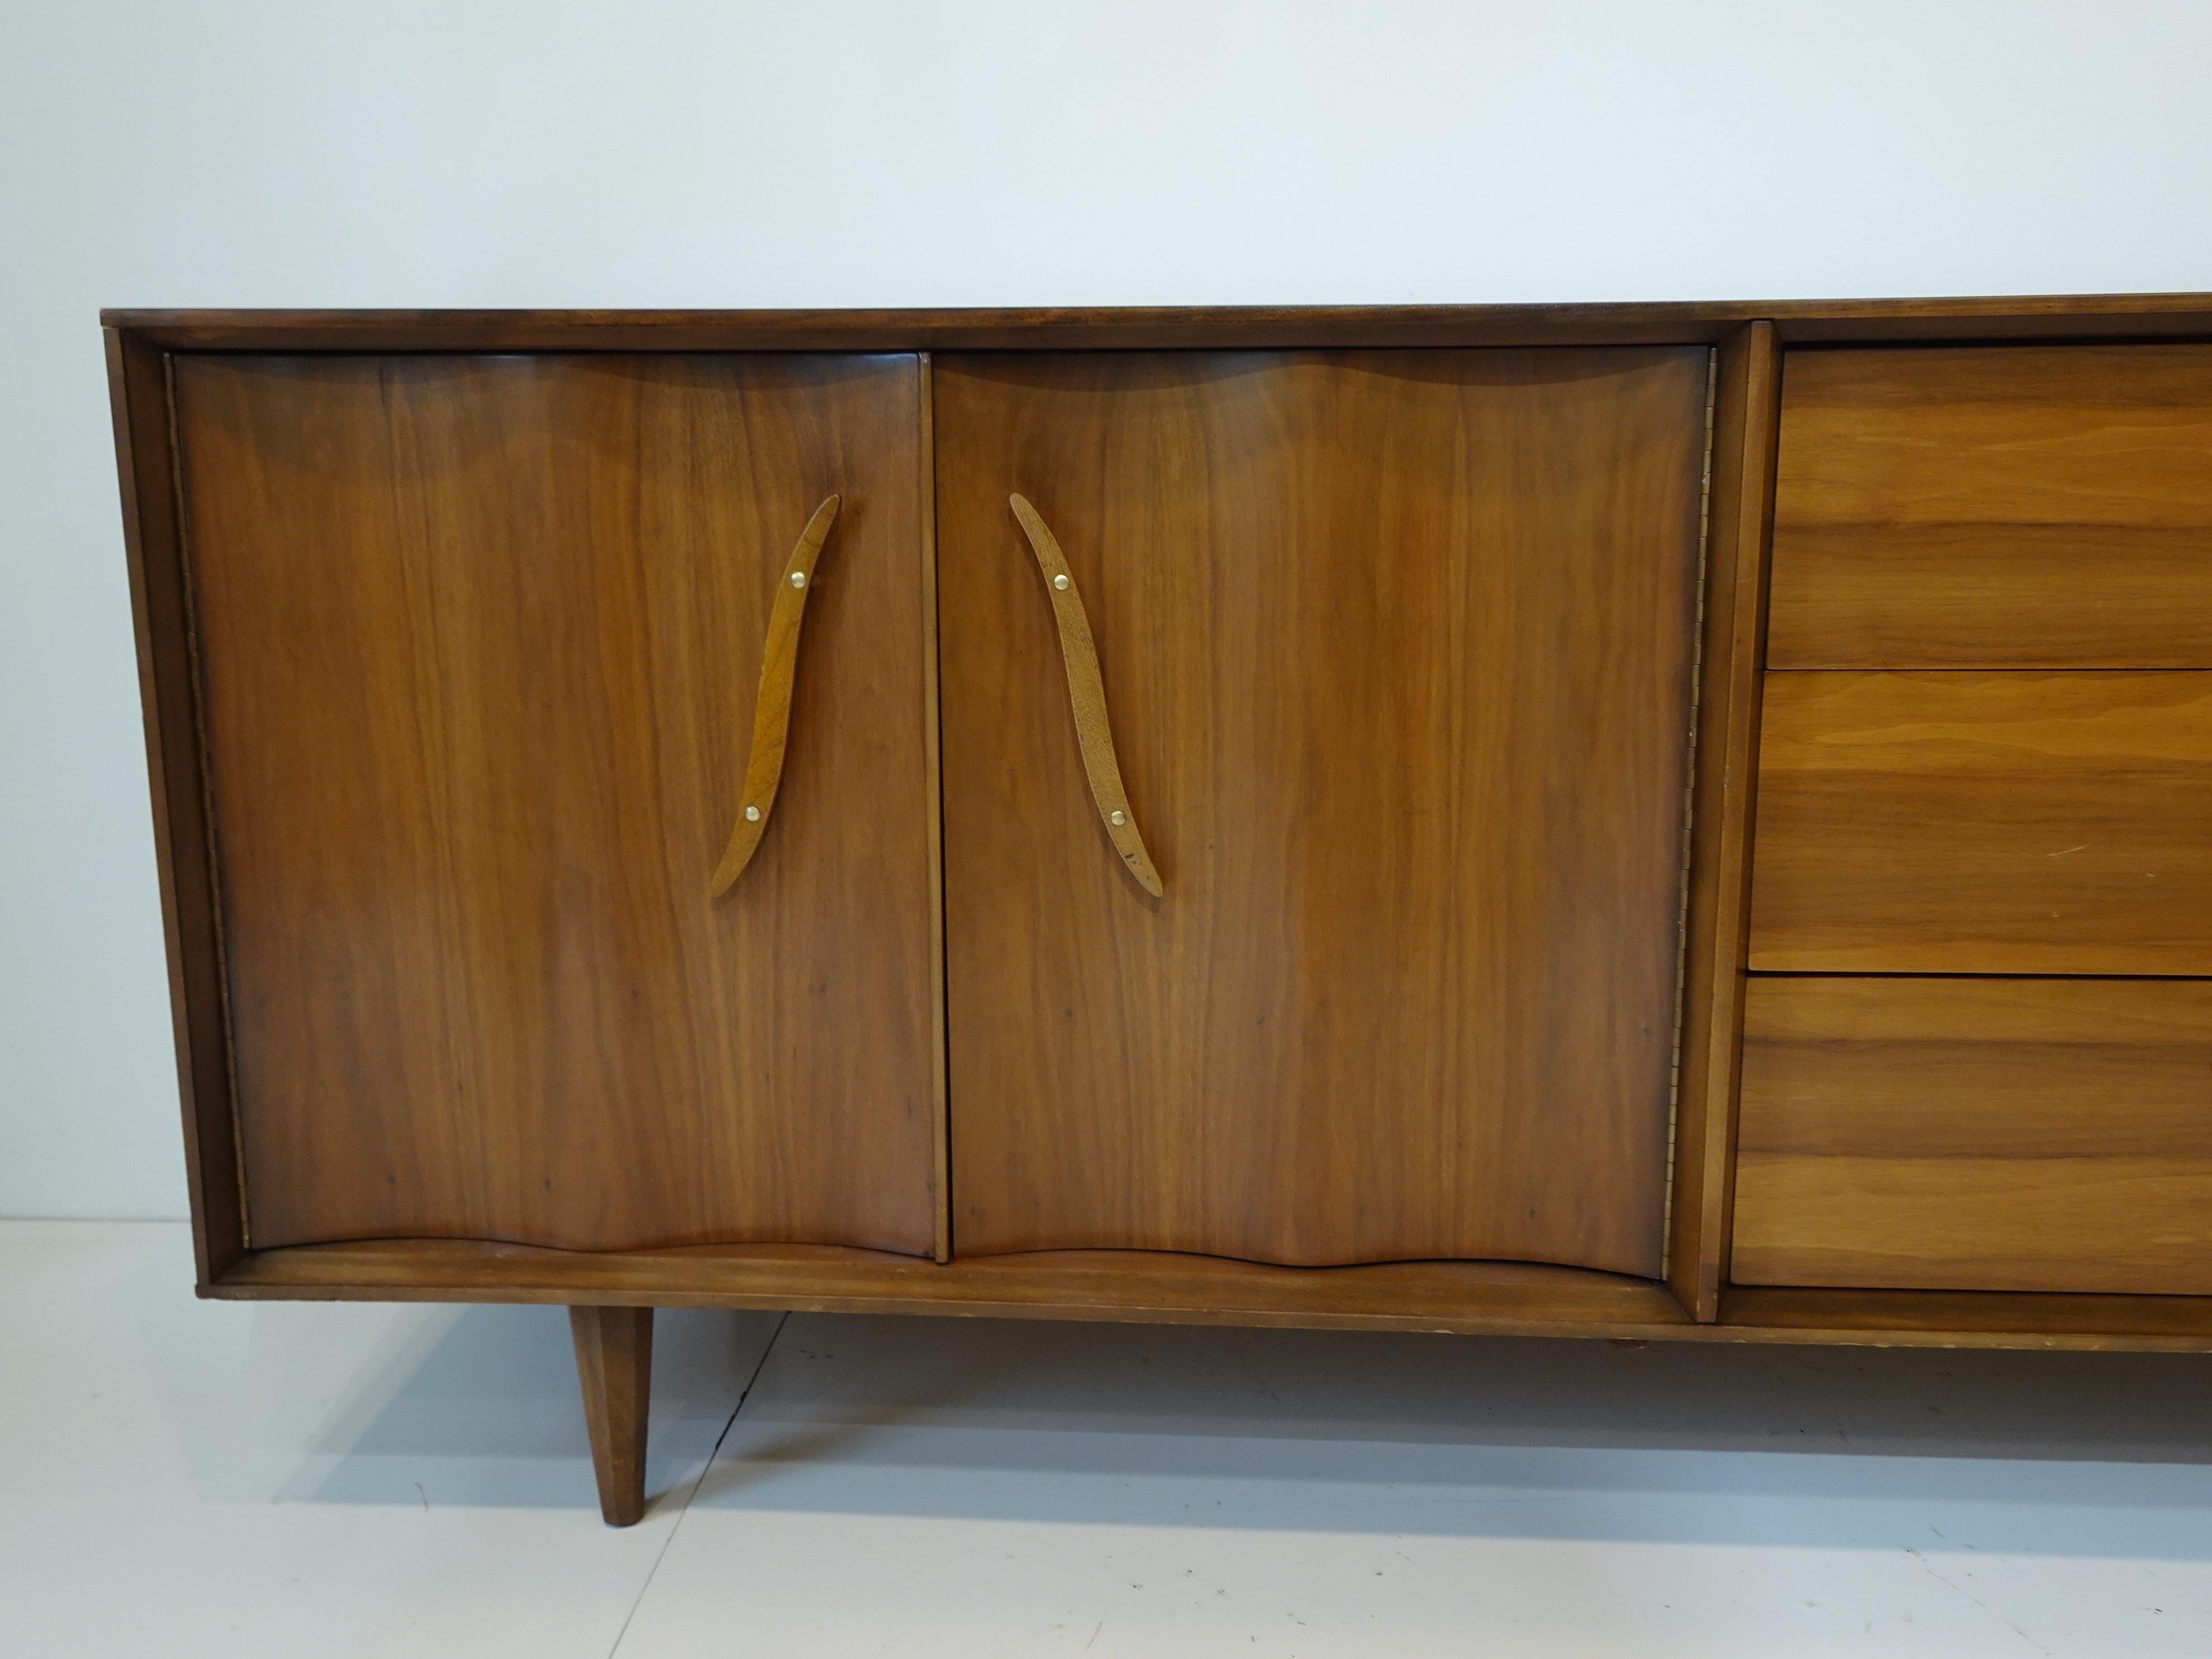 A very well crafted walnut dresser chest with double scalloped doors to one side with three walnut drawers , the other side has three larger drawers . The doors and side drawers have nice sculptural handles with brass detail mounting studs , retains